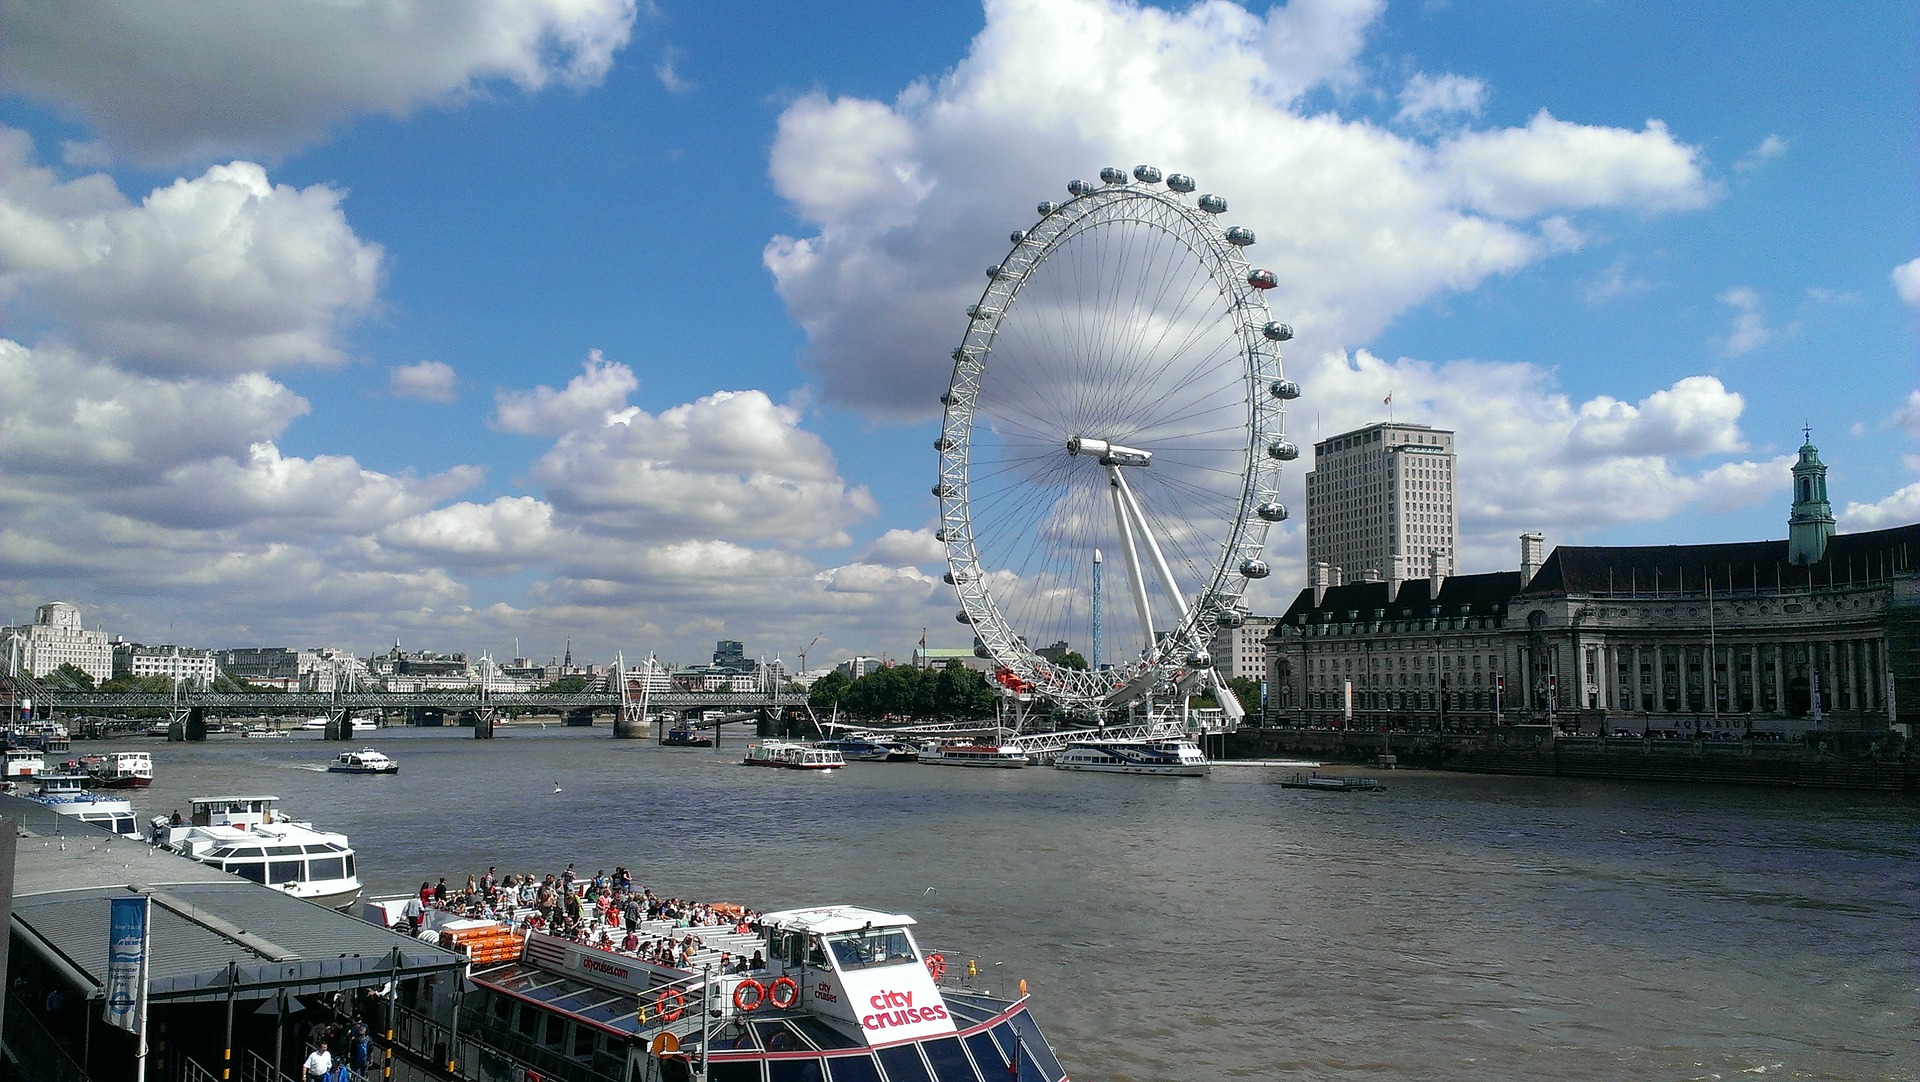 River boats on the Thames River and London Eye, London, UK